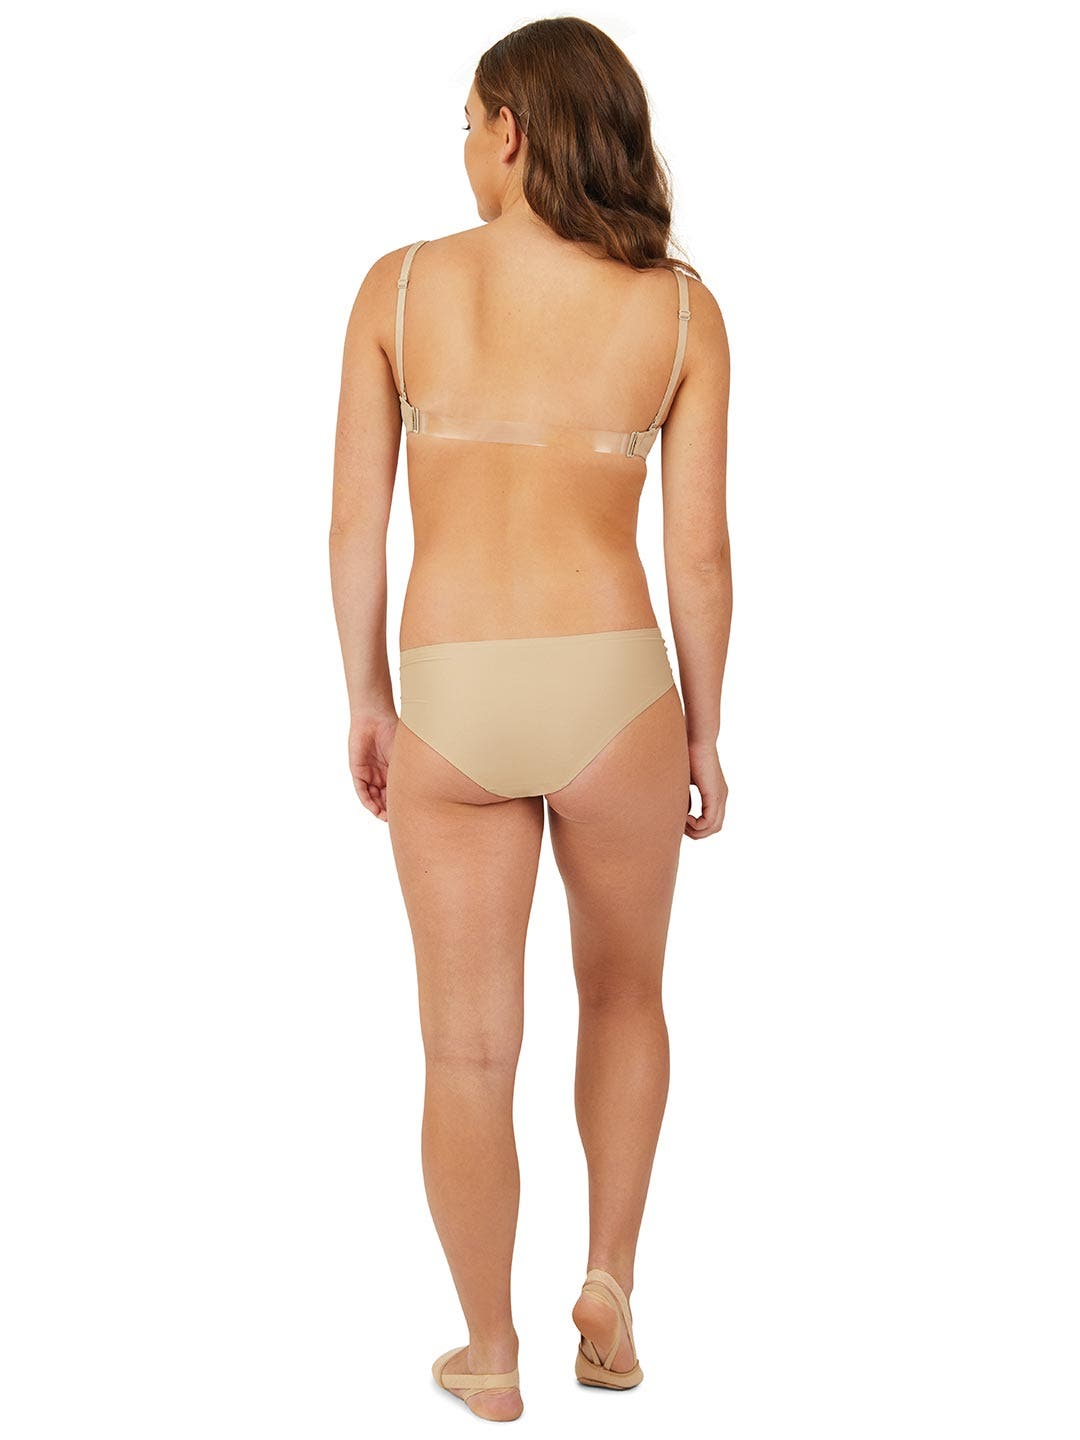 Capezio Seamless Low-Rise Thong 3678 Made by Capezio (Style # 3678)